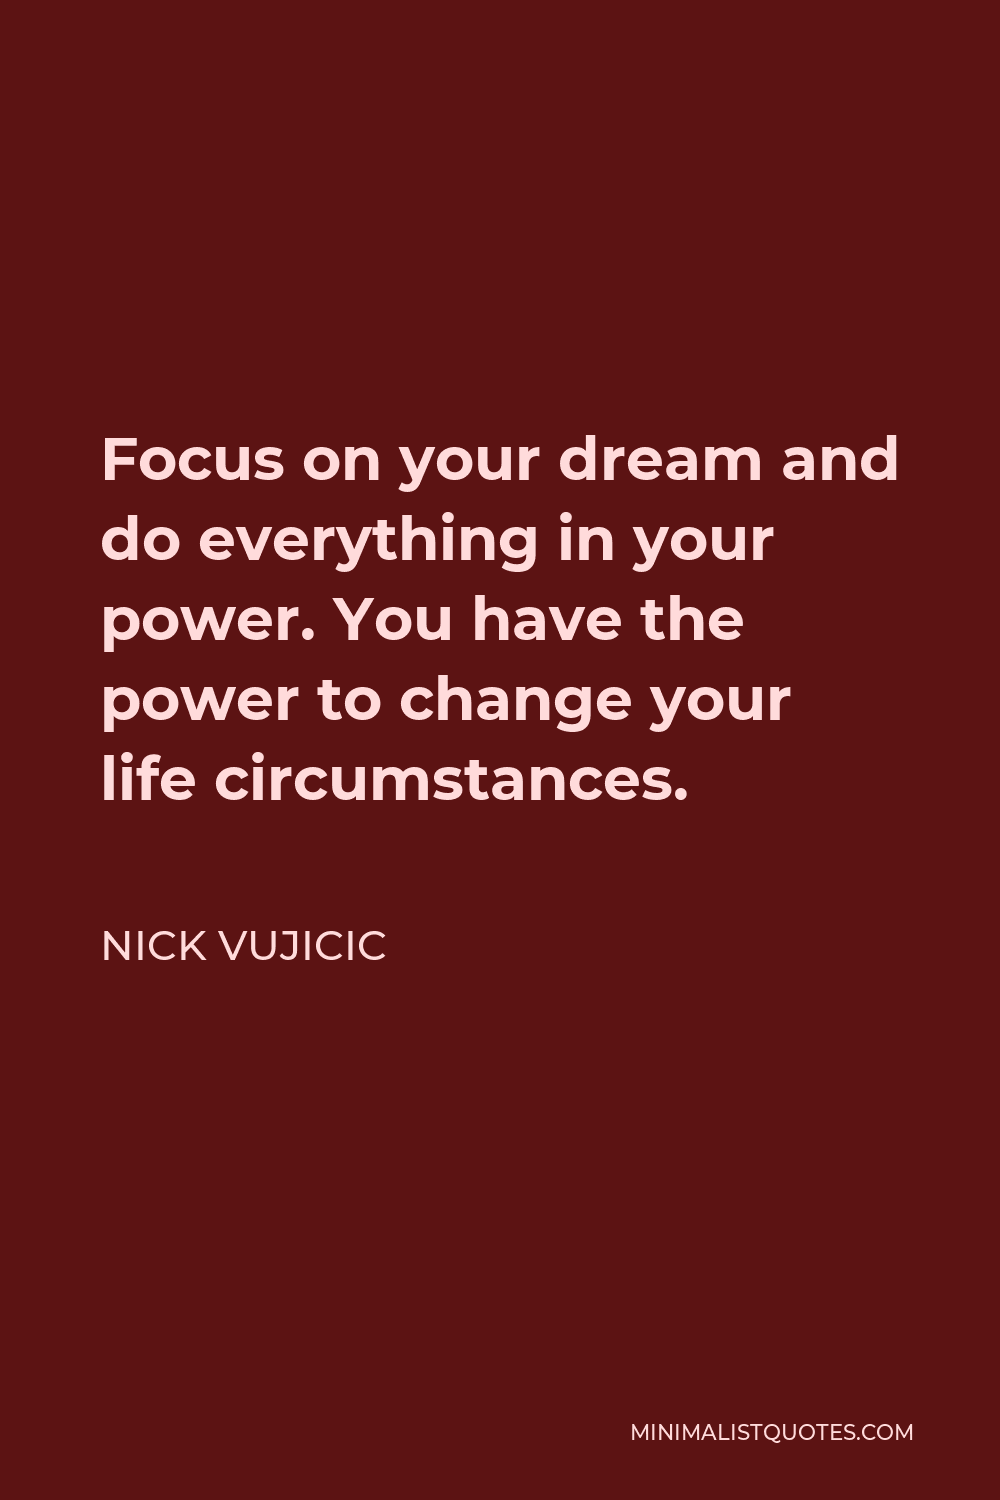 Nick Vujicic Quote - Focus on your dream and do everything in your power. You have the power to change your life circumstances.